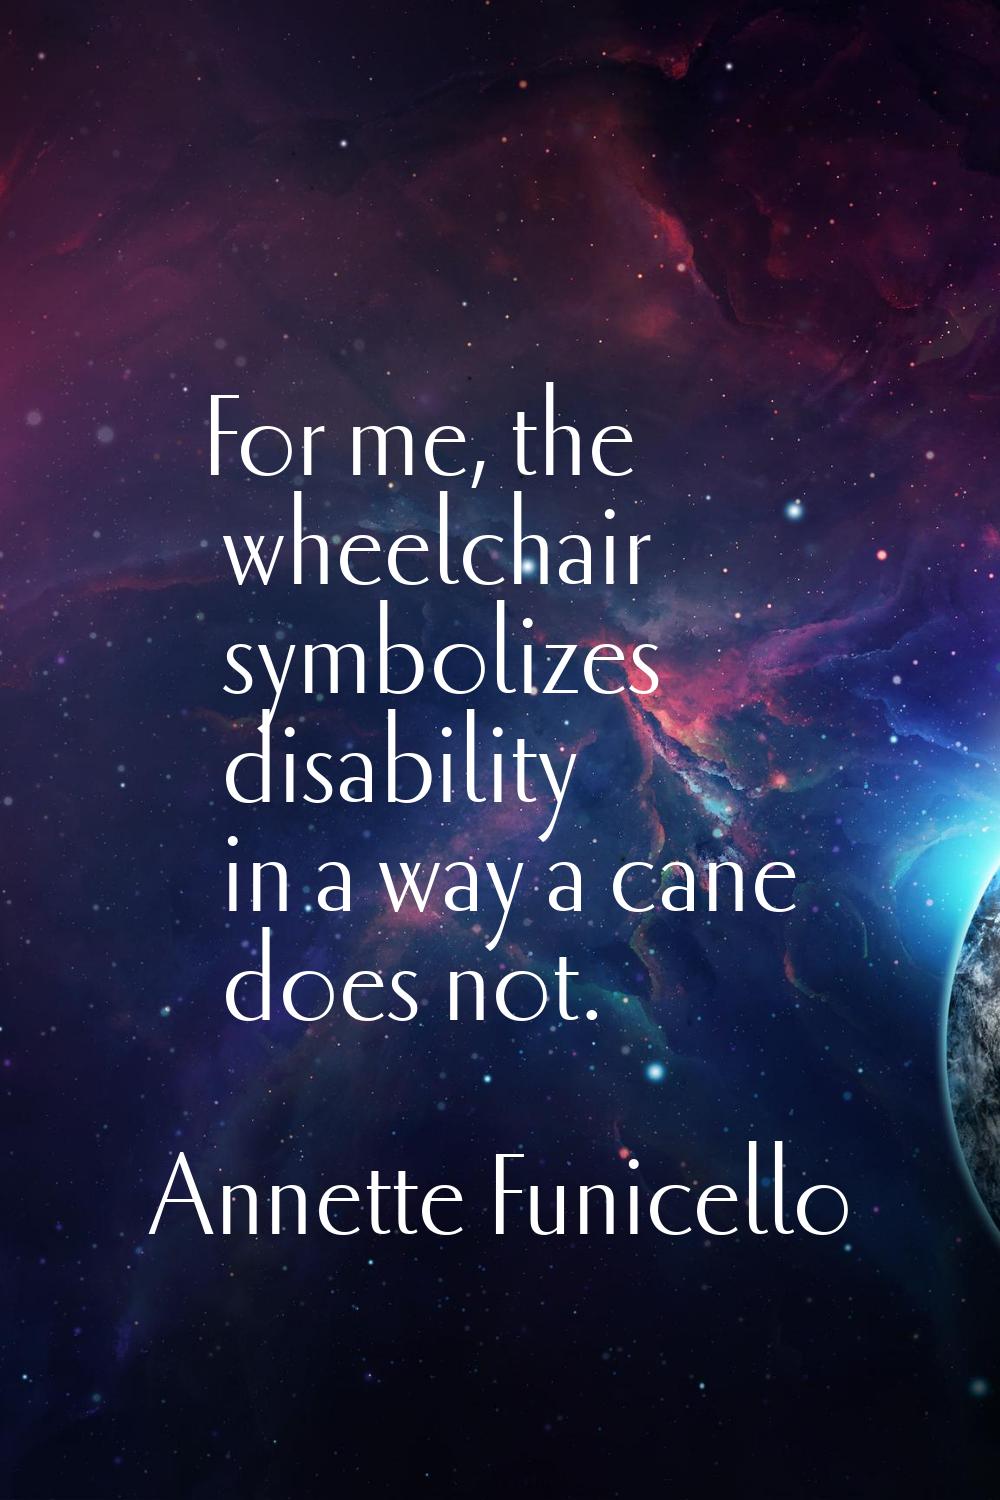 For me, the wheelchair symbolizes disability in a way a cane does not.